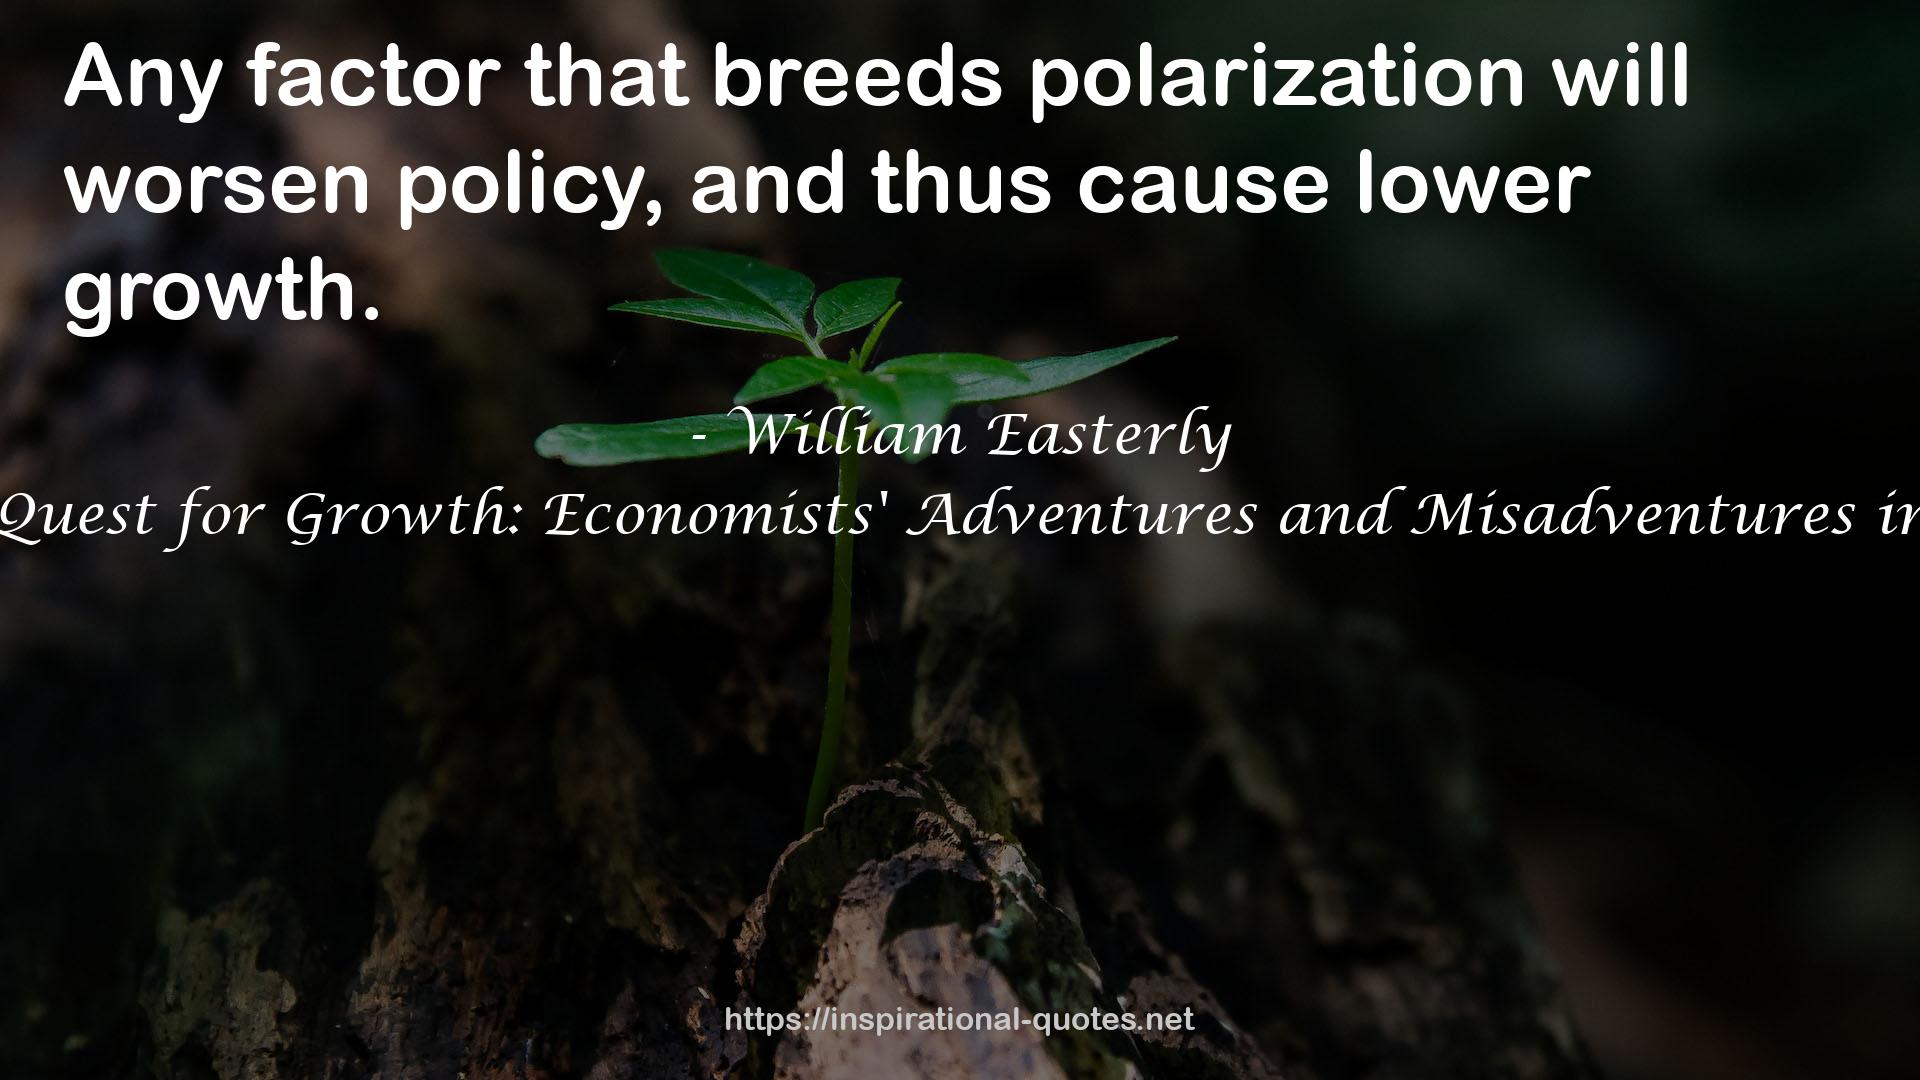 The Elusive Quest for Growth: Economists' Adventures and Misadventures in the Tropics QUOTES